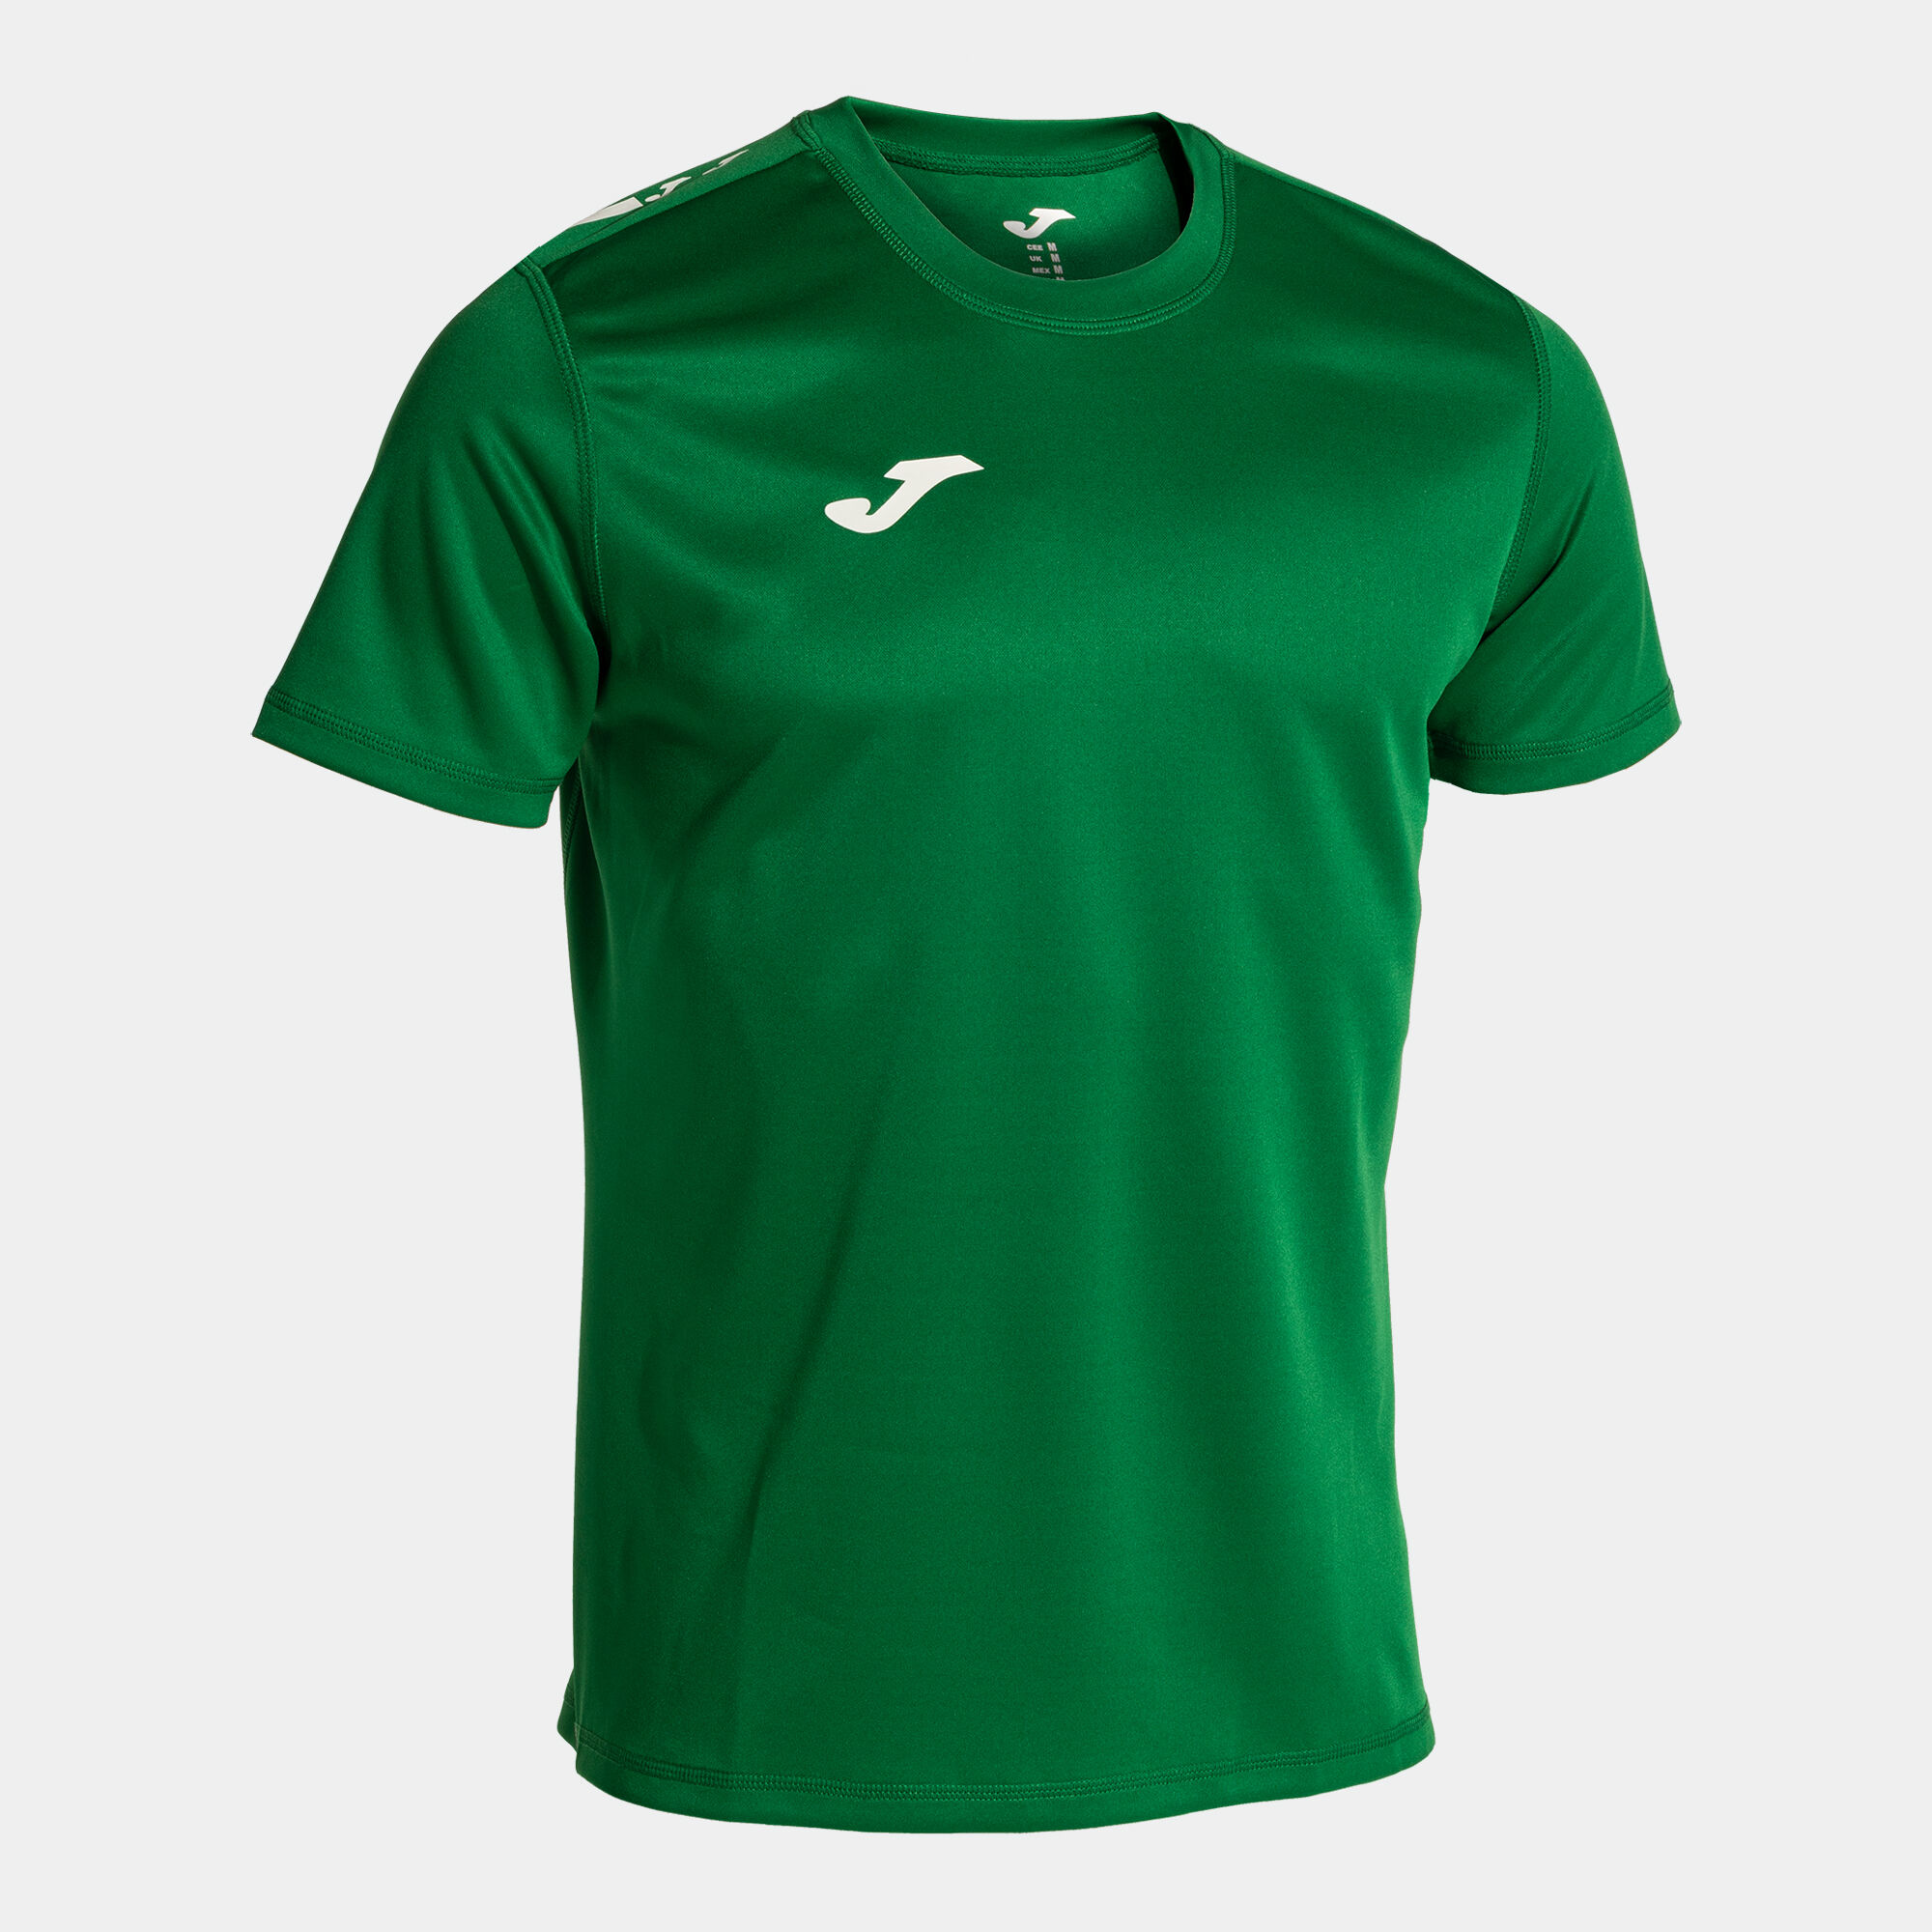 Maillot manches courtes homme Olimpiada rugby vert